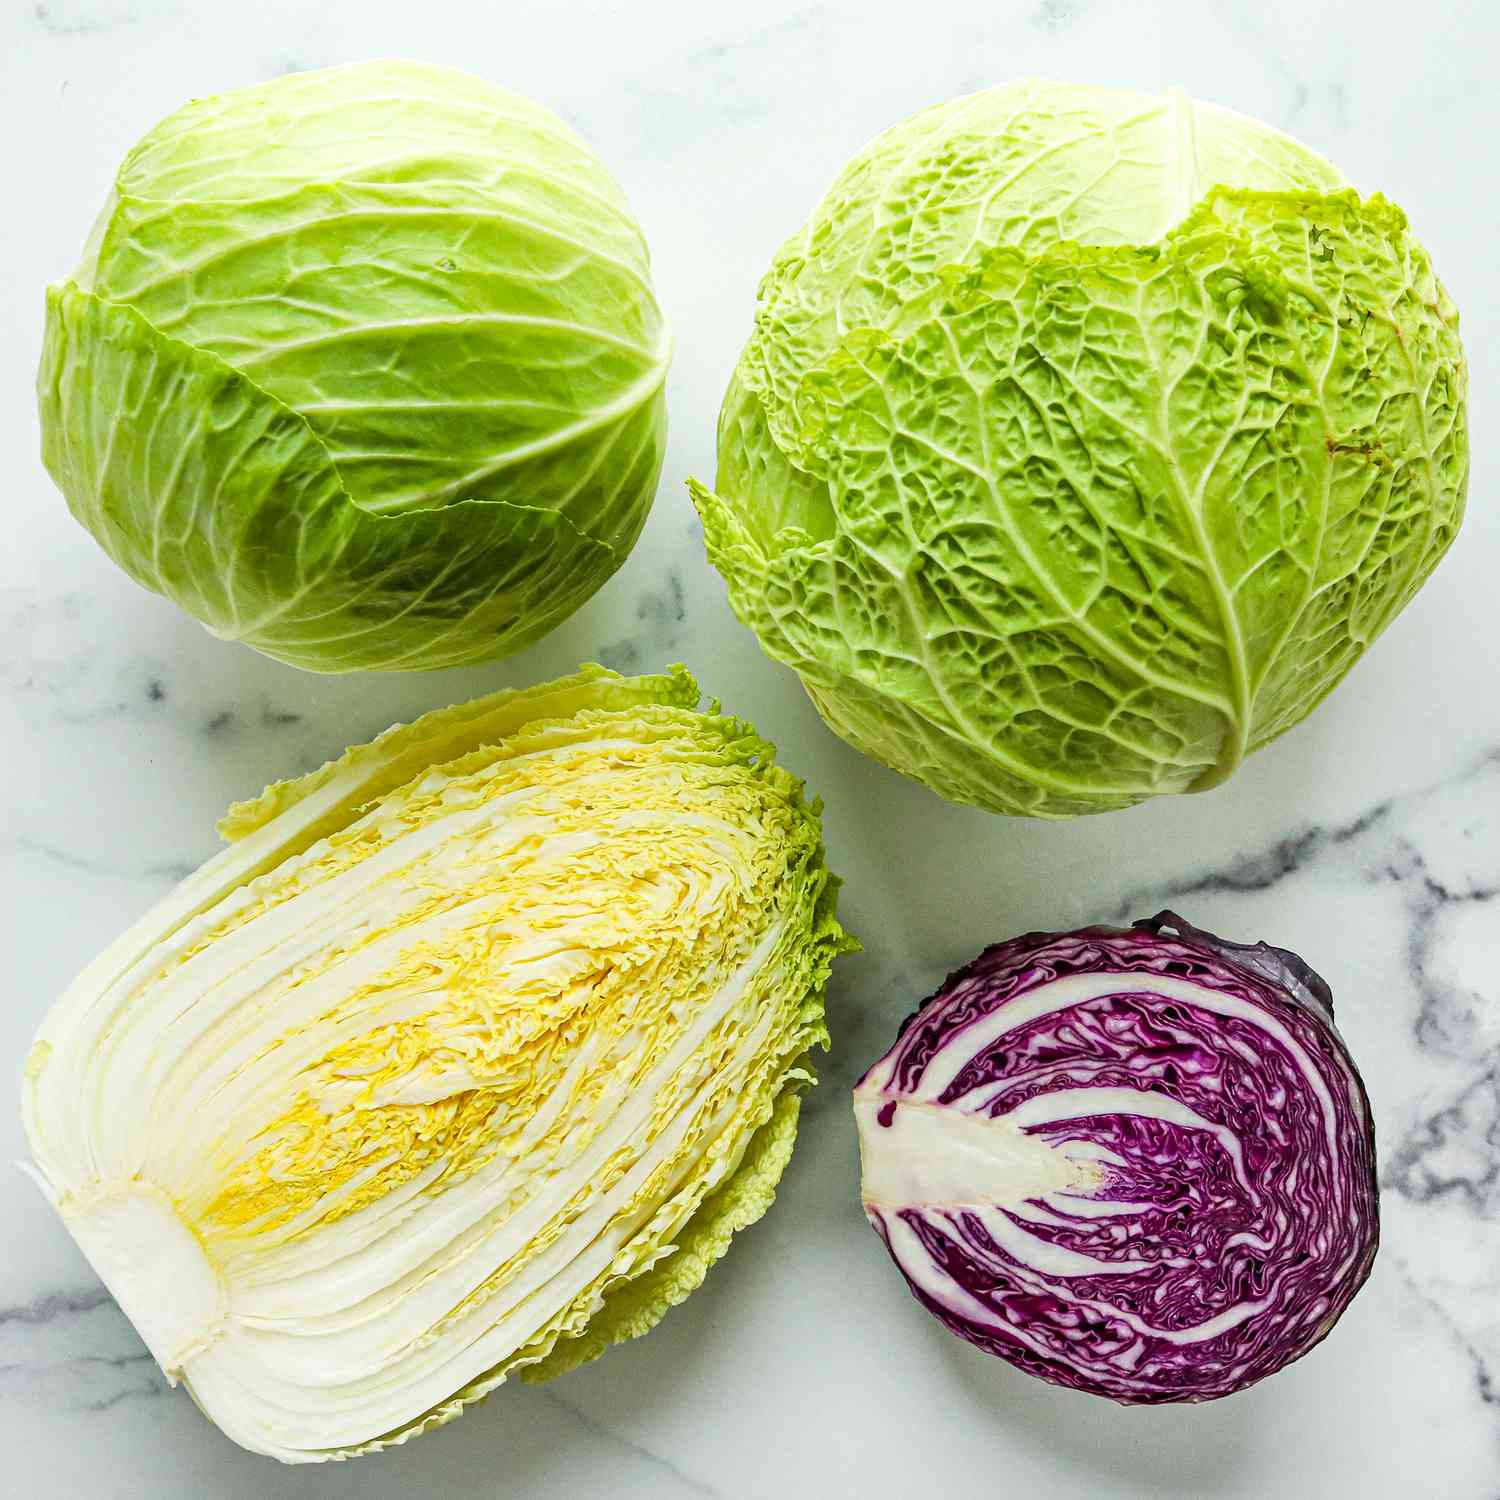 A variety of types of cabbage on a marble surface